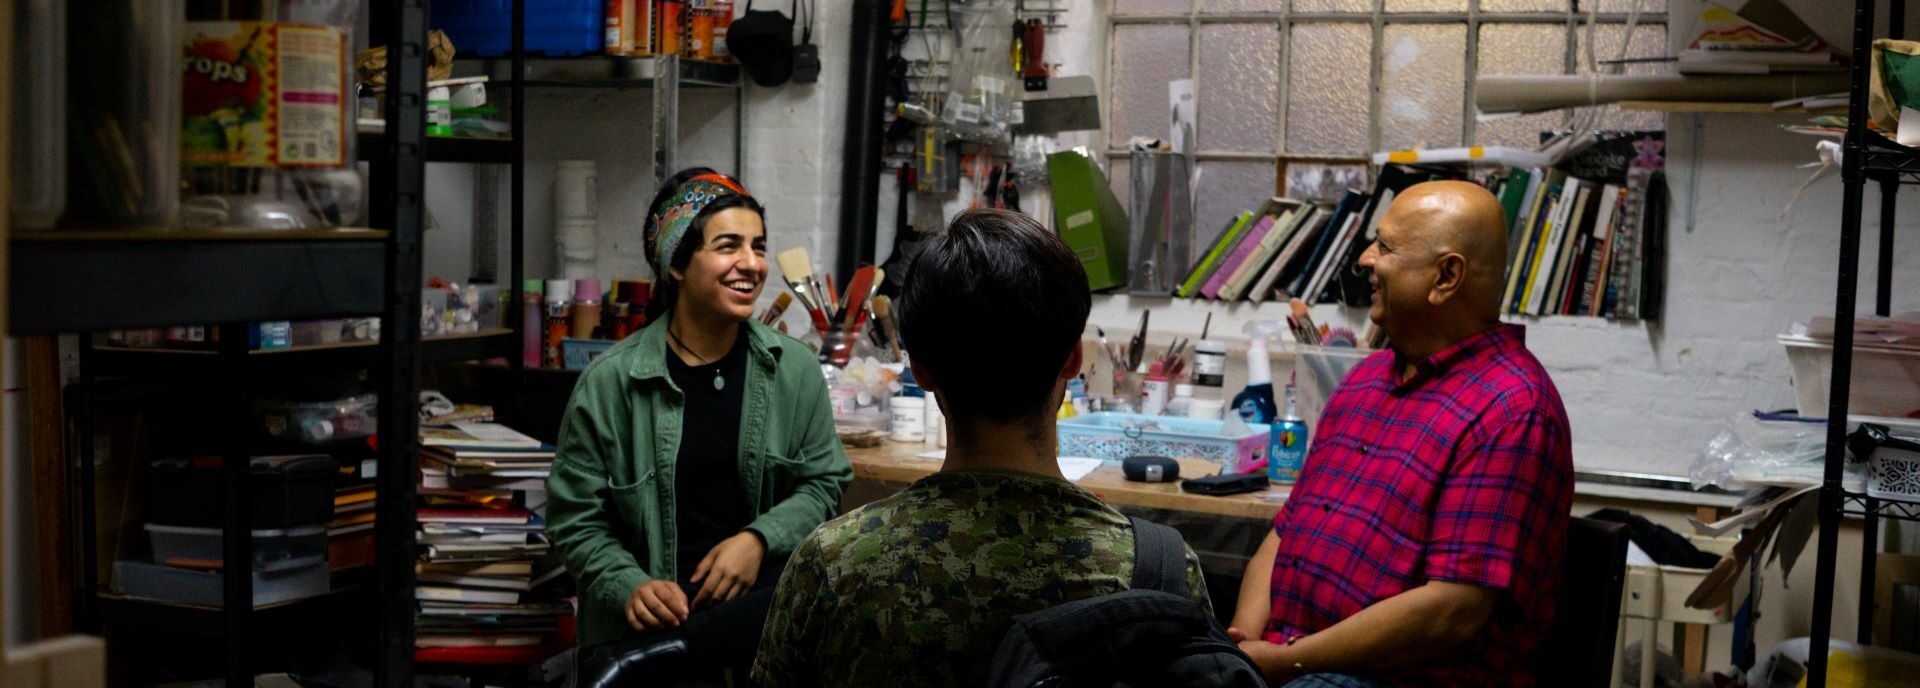 Three people sit in a busy studio, laughing with each other